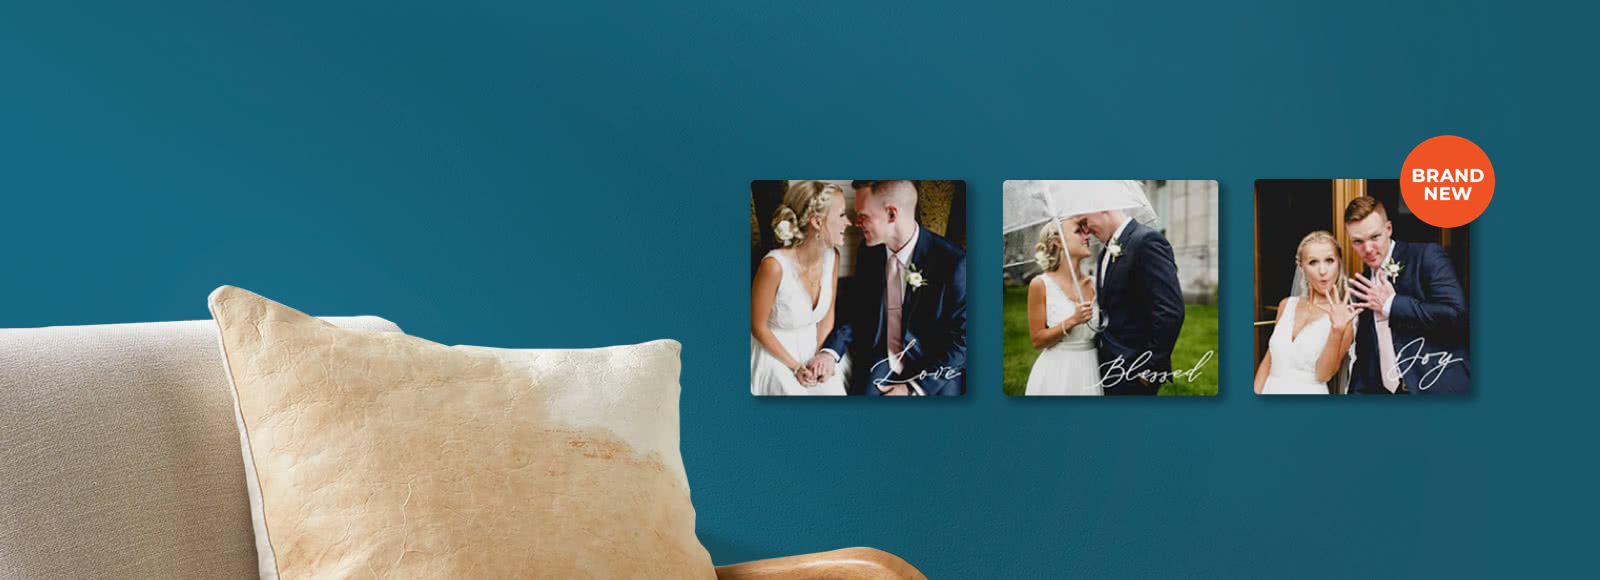  Print Your Canvas Photos to Customize Personalized